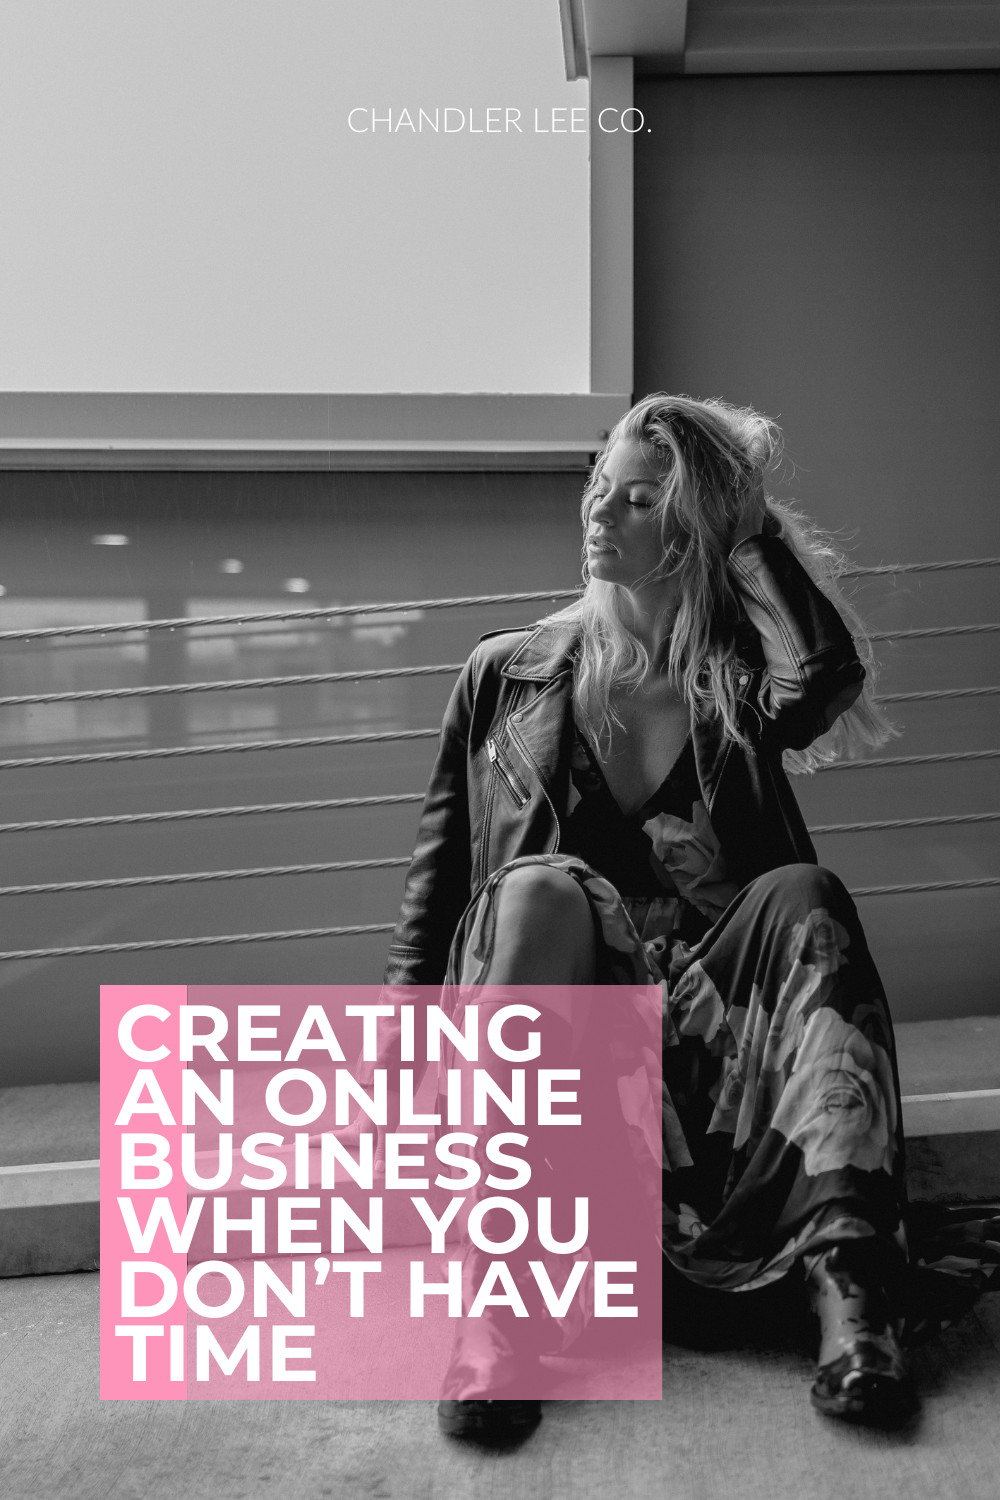 Creating an Online Business When You Don't Have Time